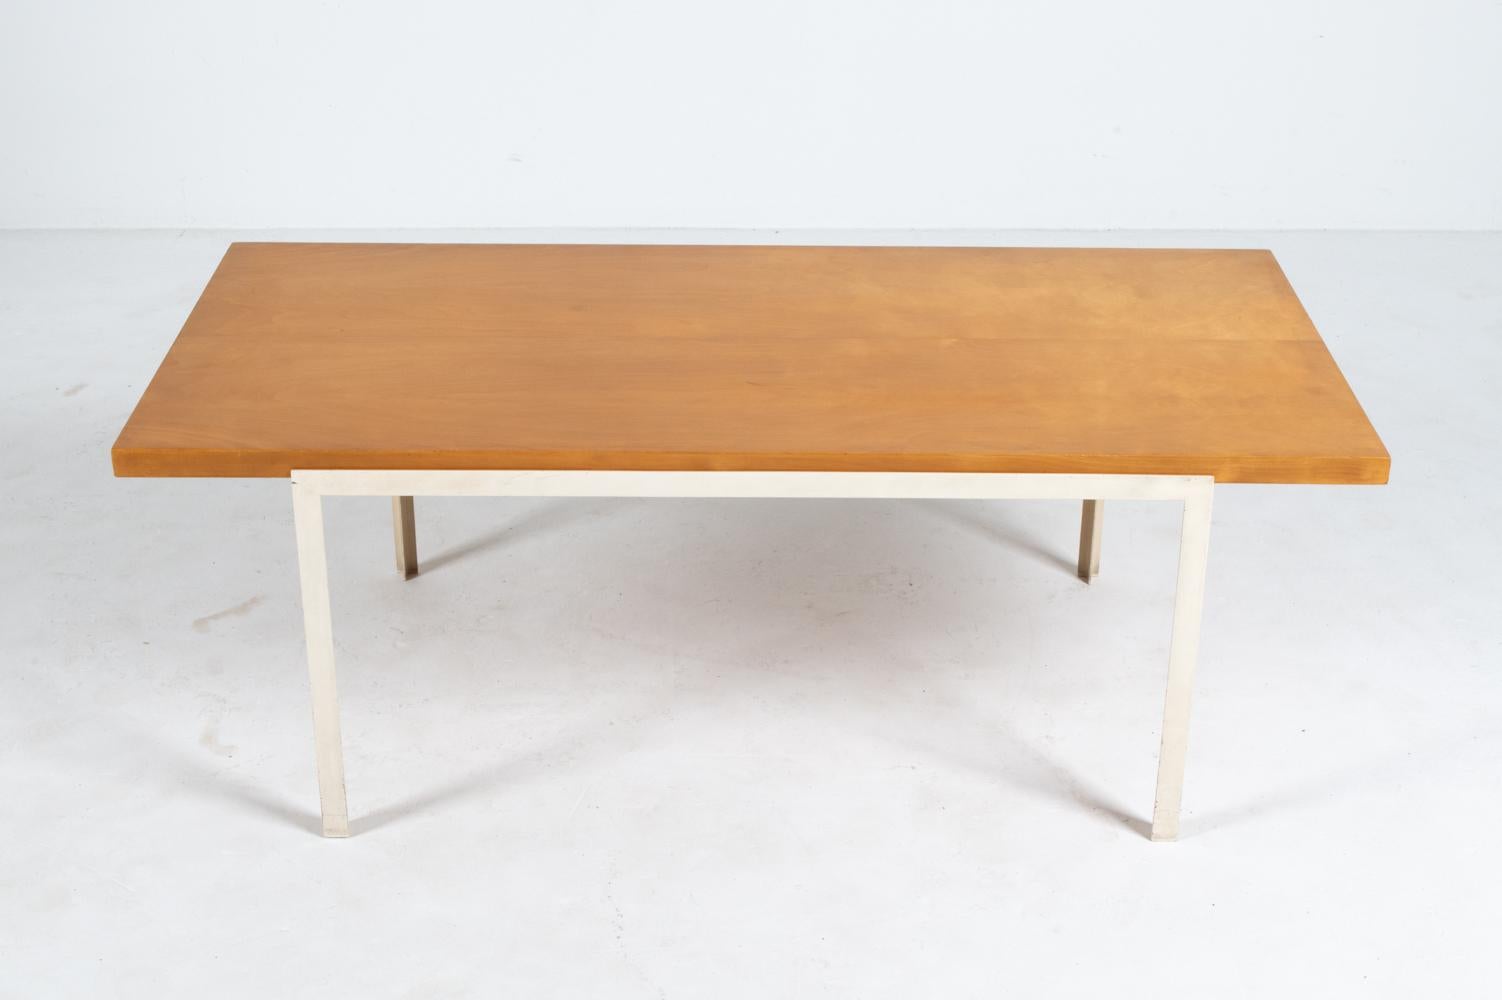 Rare Florence Knoll T-Angle Coffee Table in Birch; Knoll International c. 1960's In Good Condition For Sale In Norwalk, CT